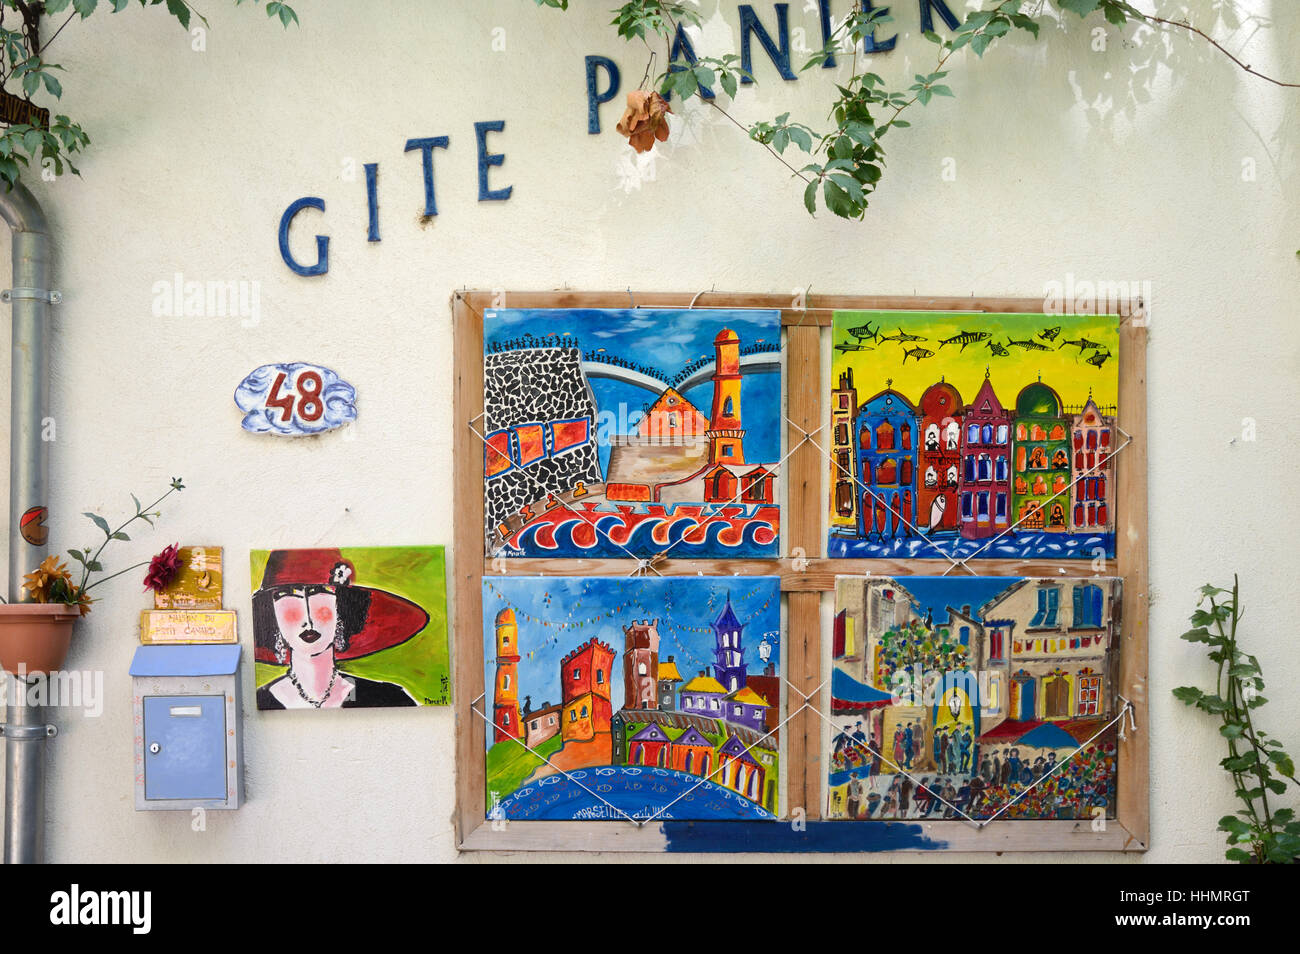 Decorative Sign for a Gite, Small Hotel, Guesthouse or 'Bed and Breakfast' Panier Marseille or Marseilles Provence France Stock Photo